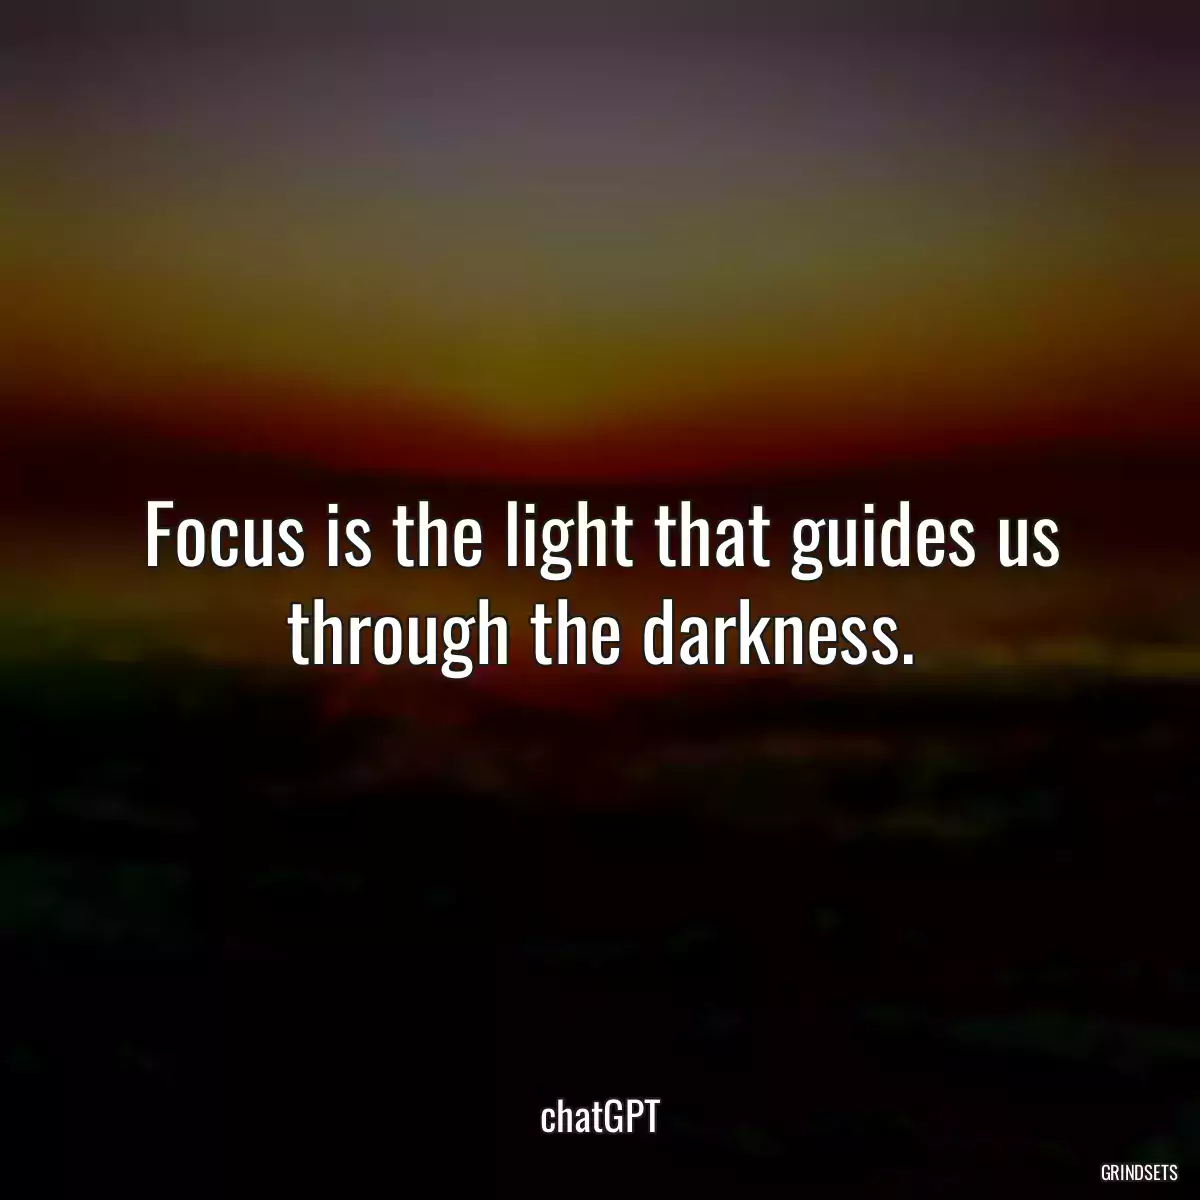 Focus is the light that guides us through the darkness.